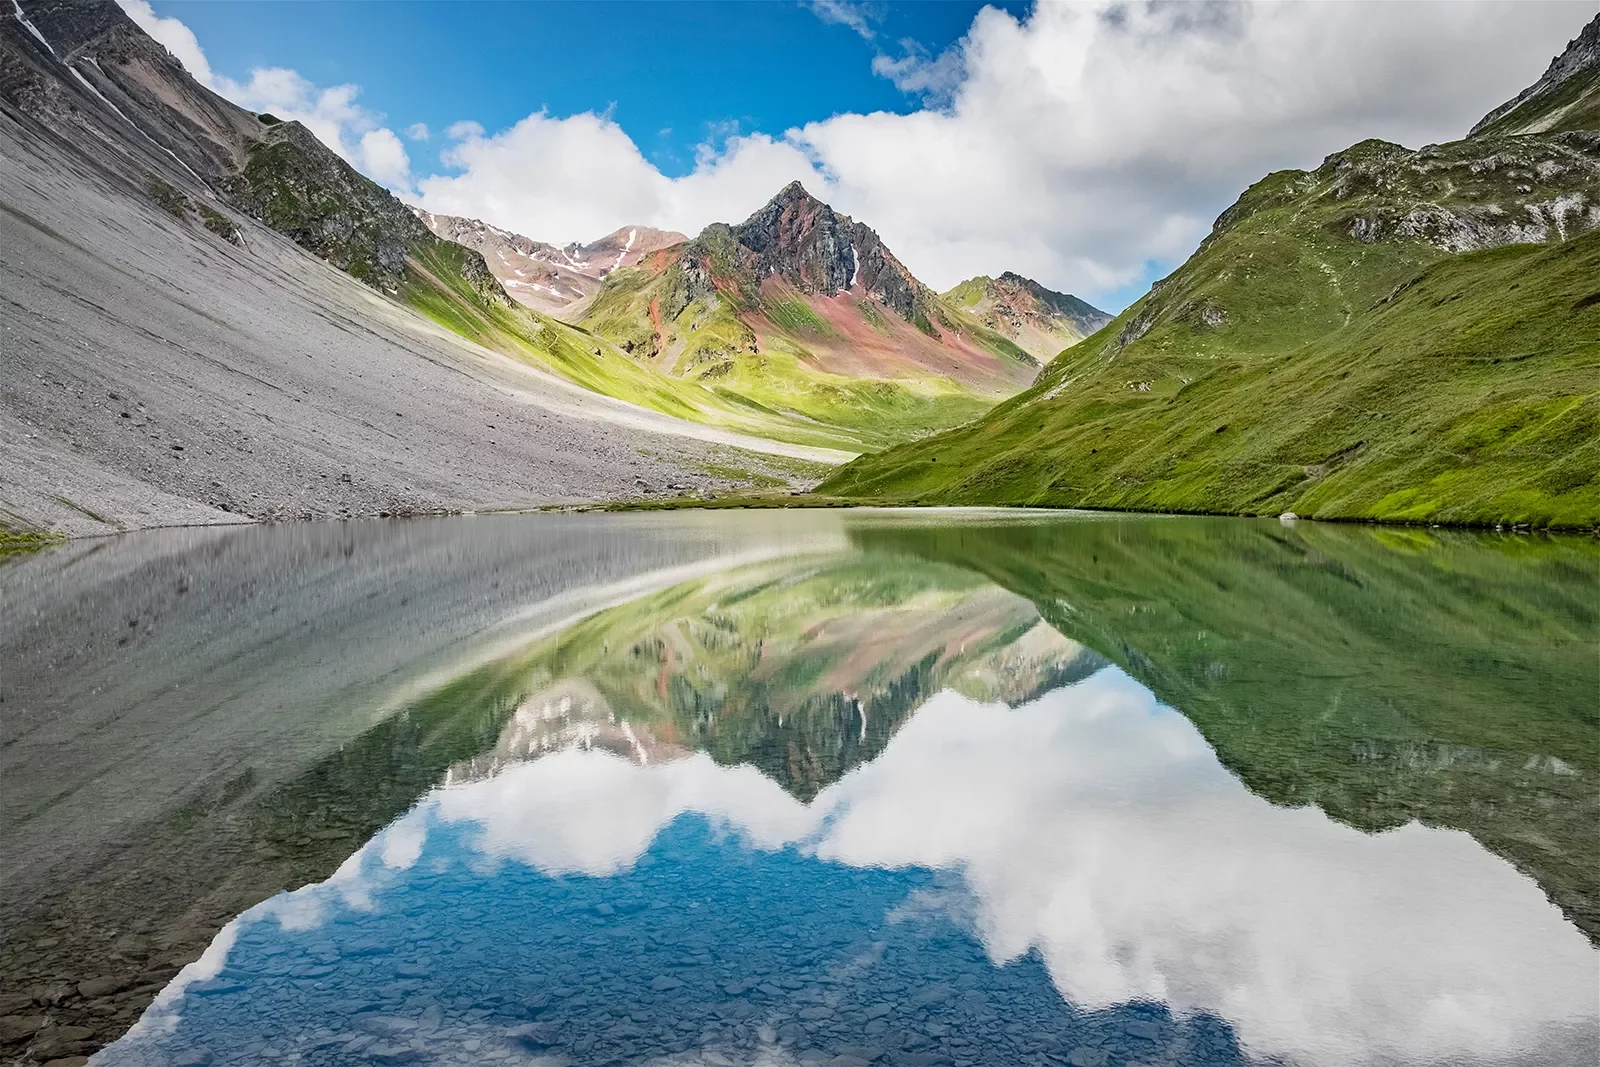 Reflection of mountains in Alps lake.